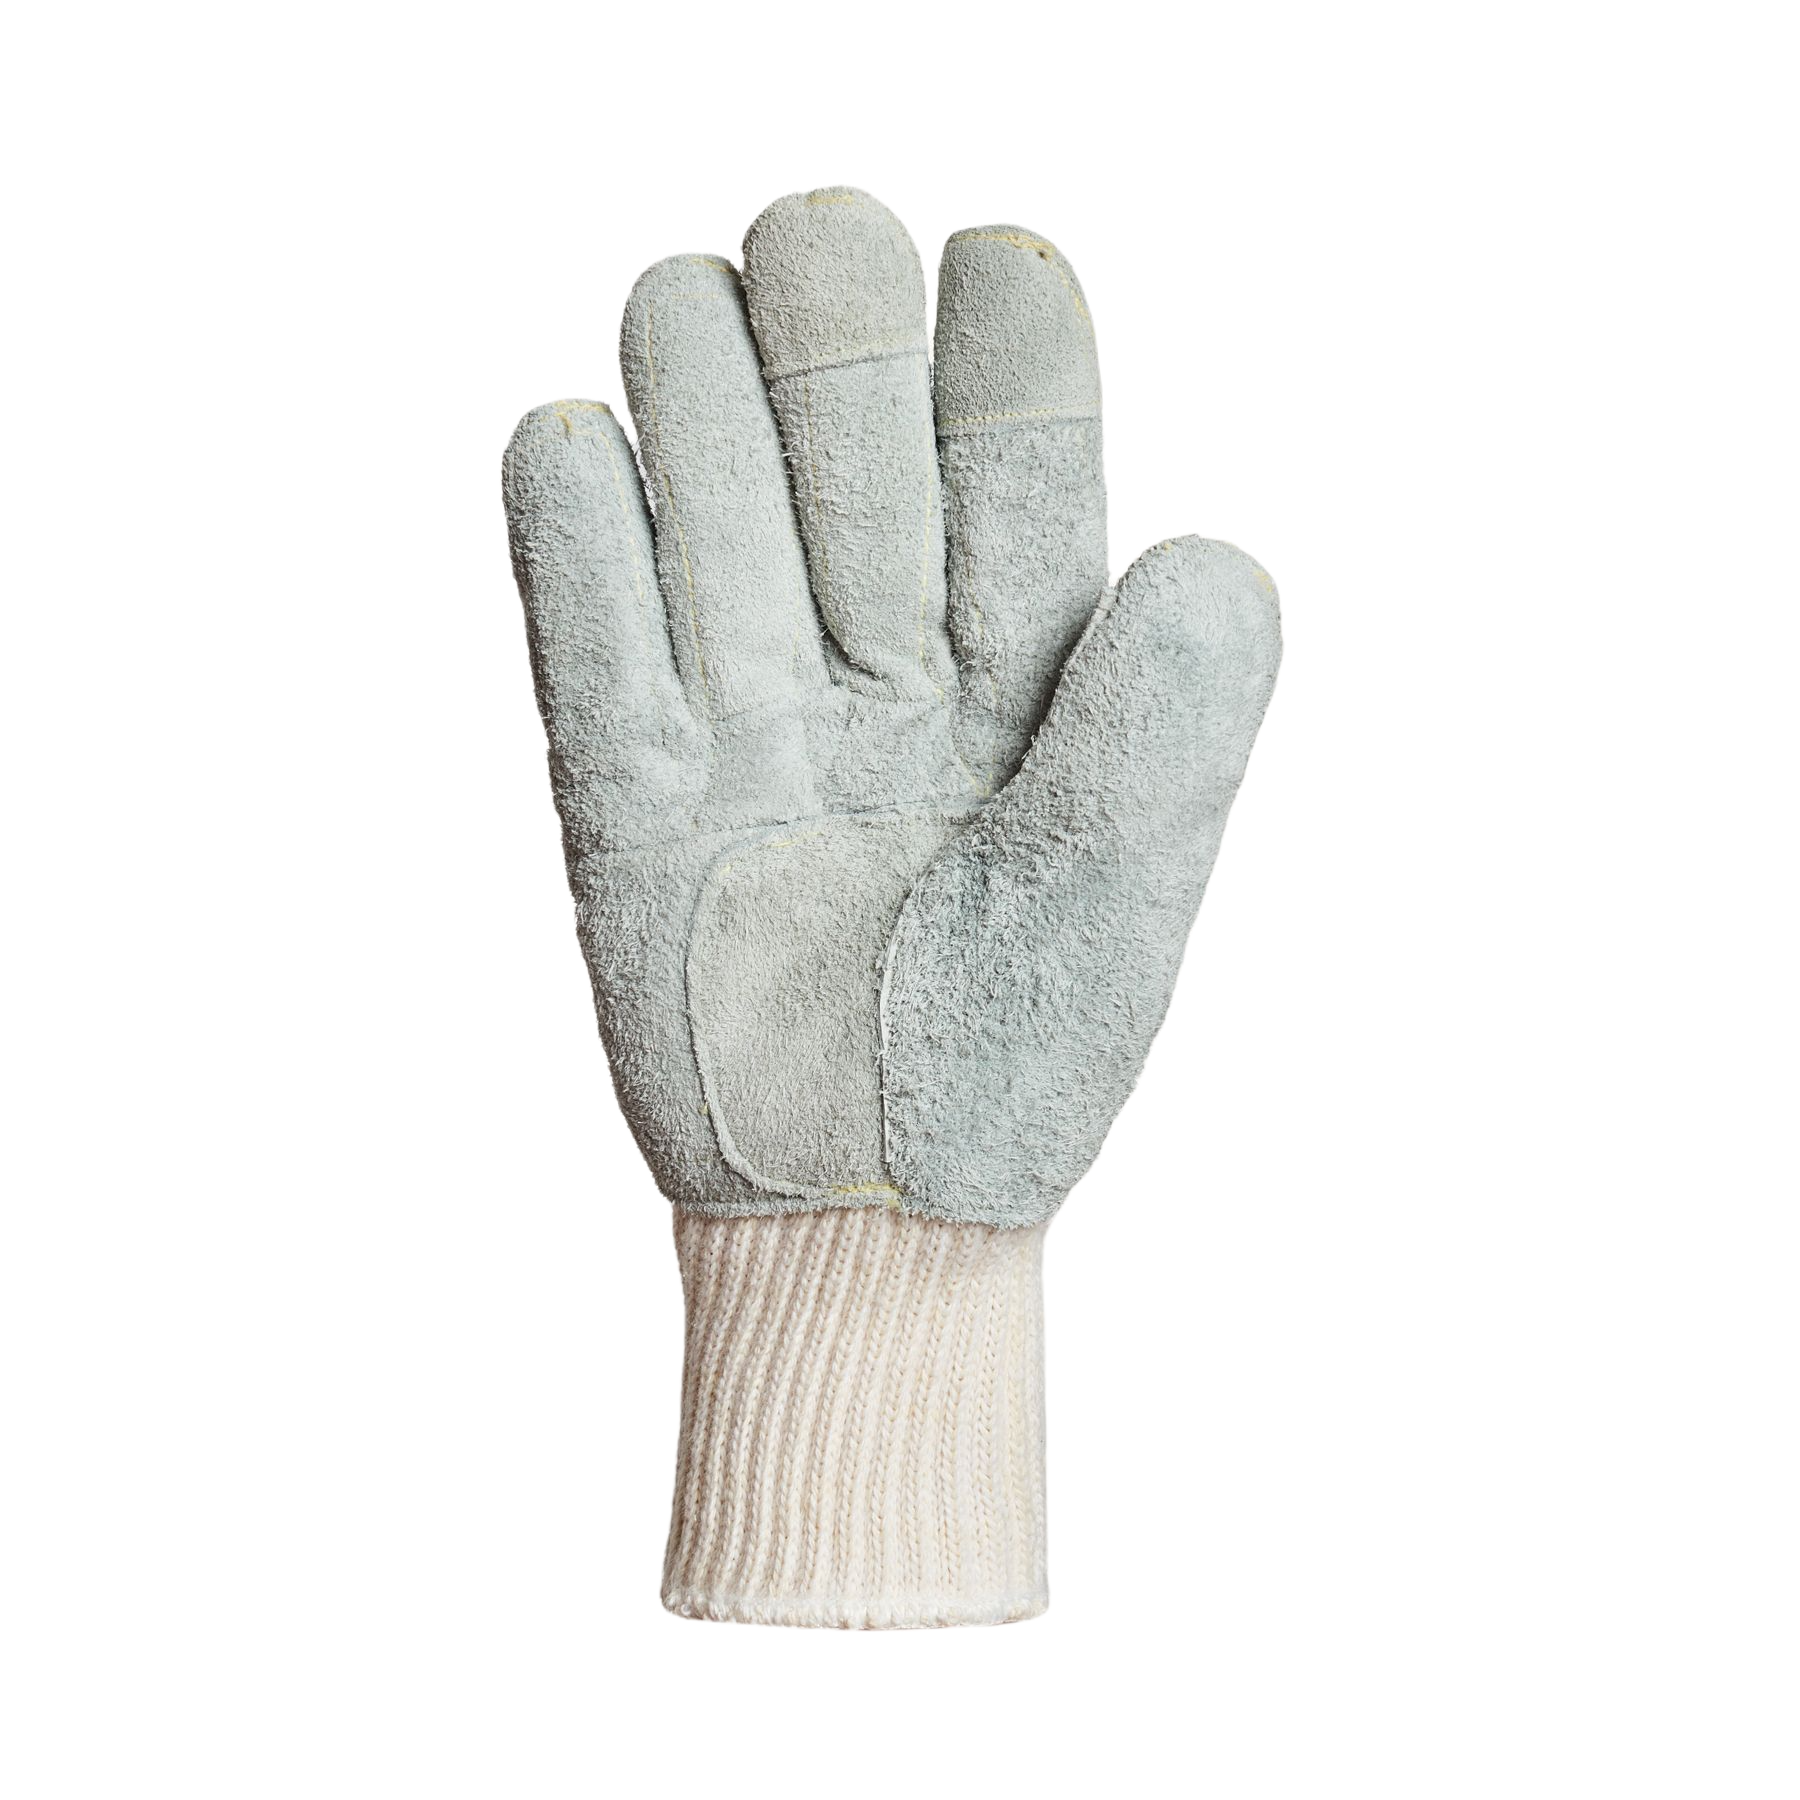 Super-Fit™ Grey Knit Thermal Work Gloves with Natural Rubber Coated Palm -  Medium